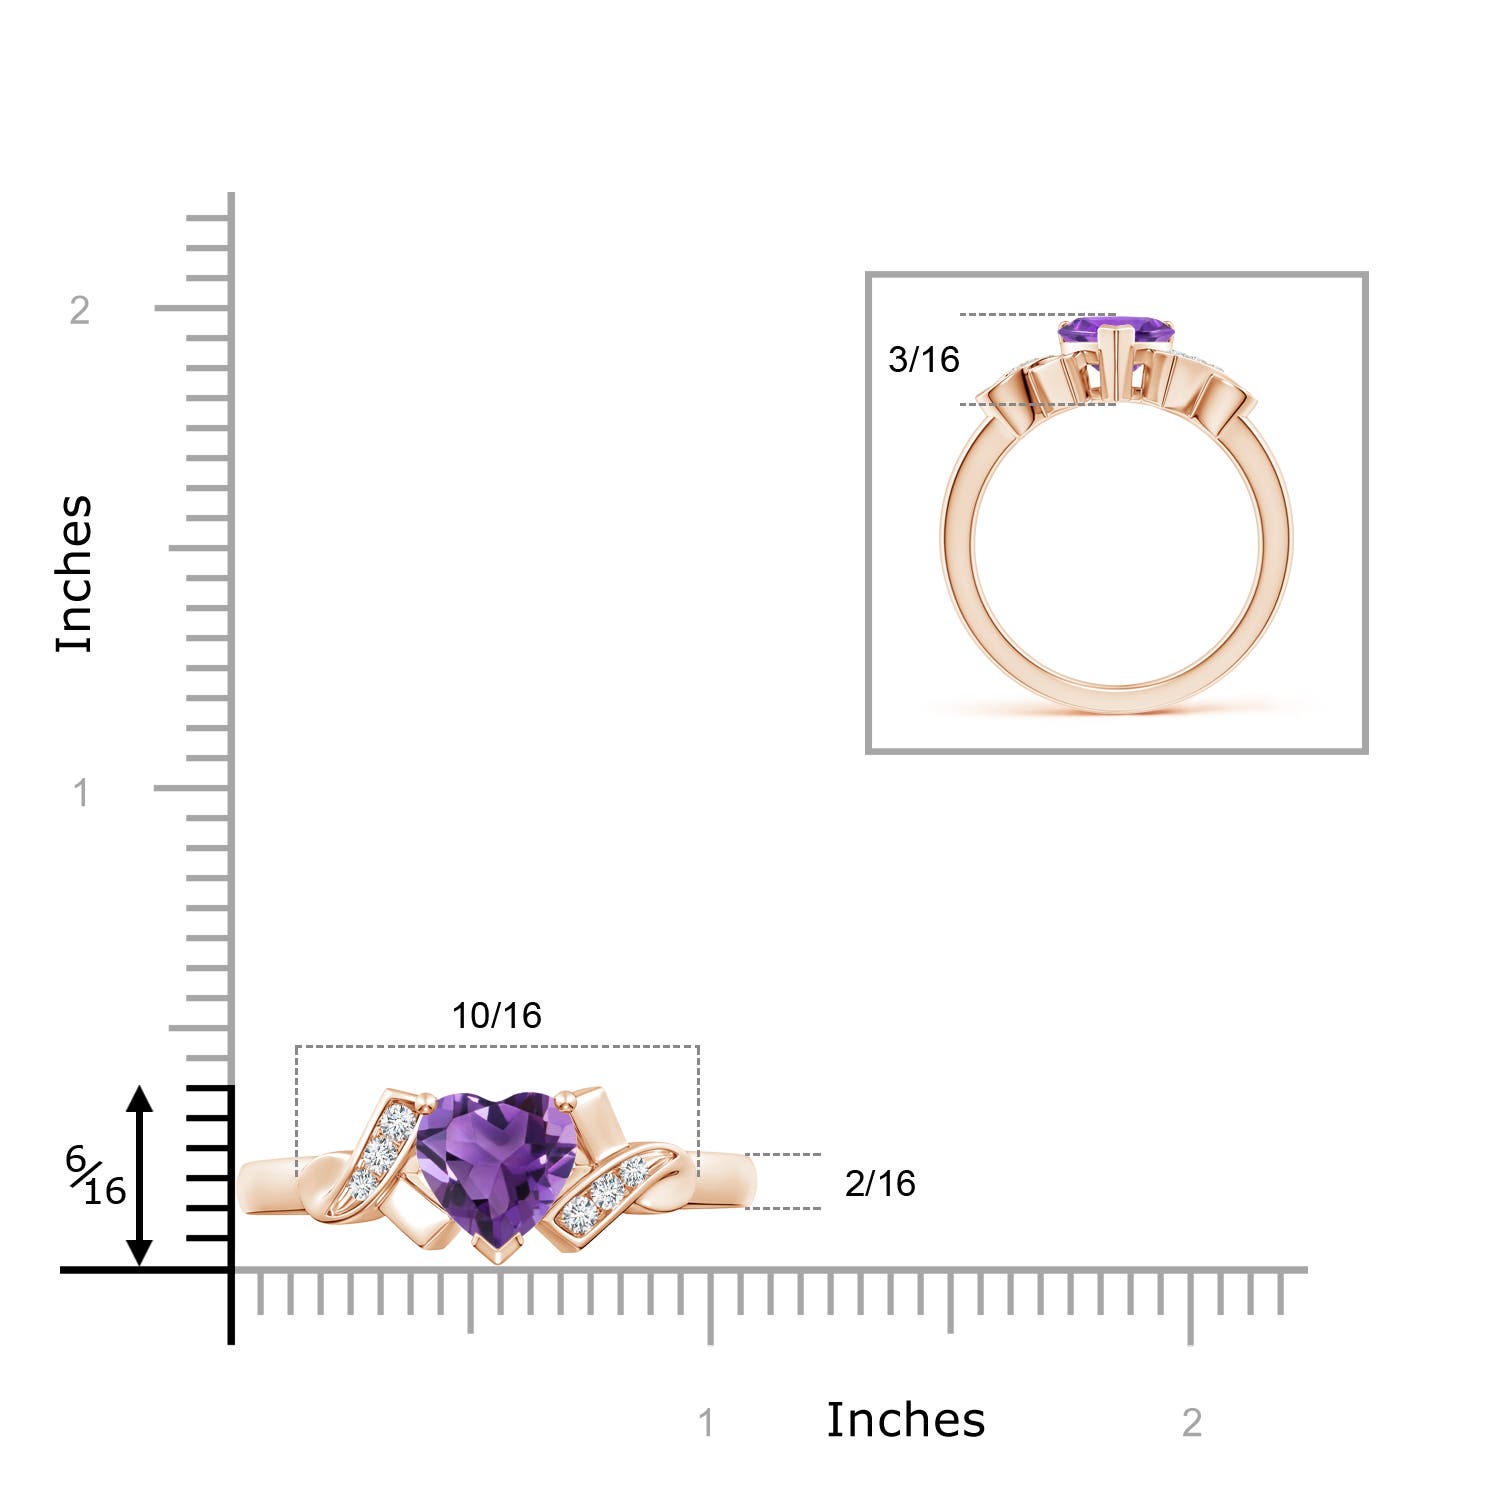 AAA - Amethyst / 1.17 CT / 14 KT Rose Gold